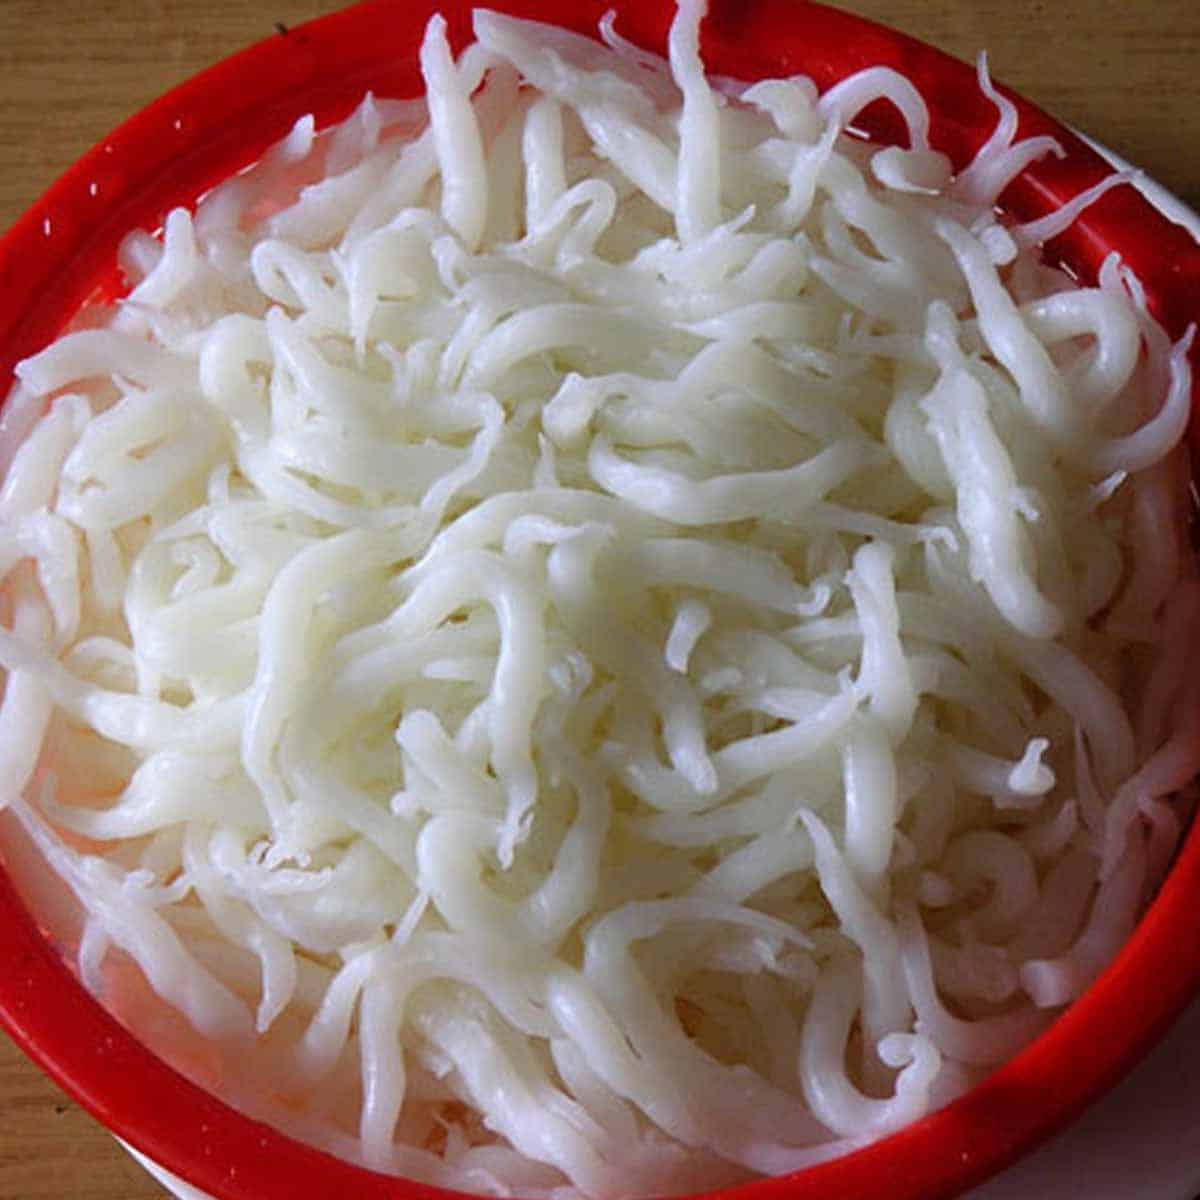 Also known as rat's tail noodles, Lo Shu Fun (老鼠粉) are silver needle noodles which are kinda type of short, white Chinese noodles made from rice flour. These noodles are best to cook stir-fried with minced pork or chicken, beansprouts. A fantastic dish for a quick dinner because of the simplicity of preparation.